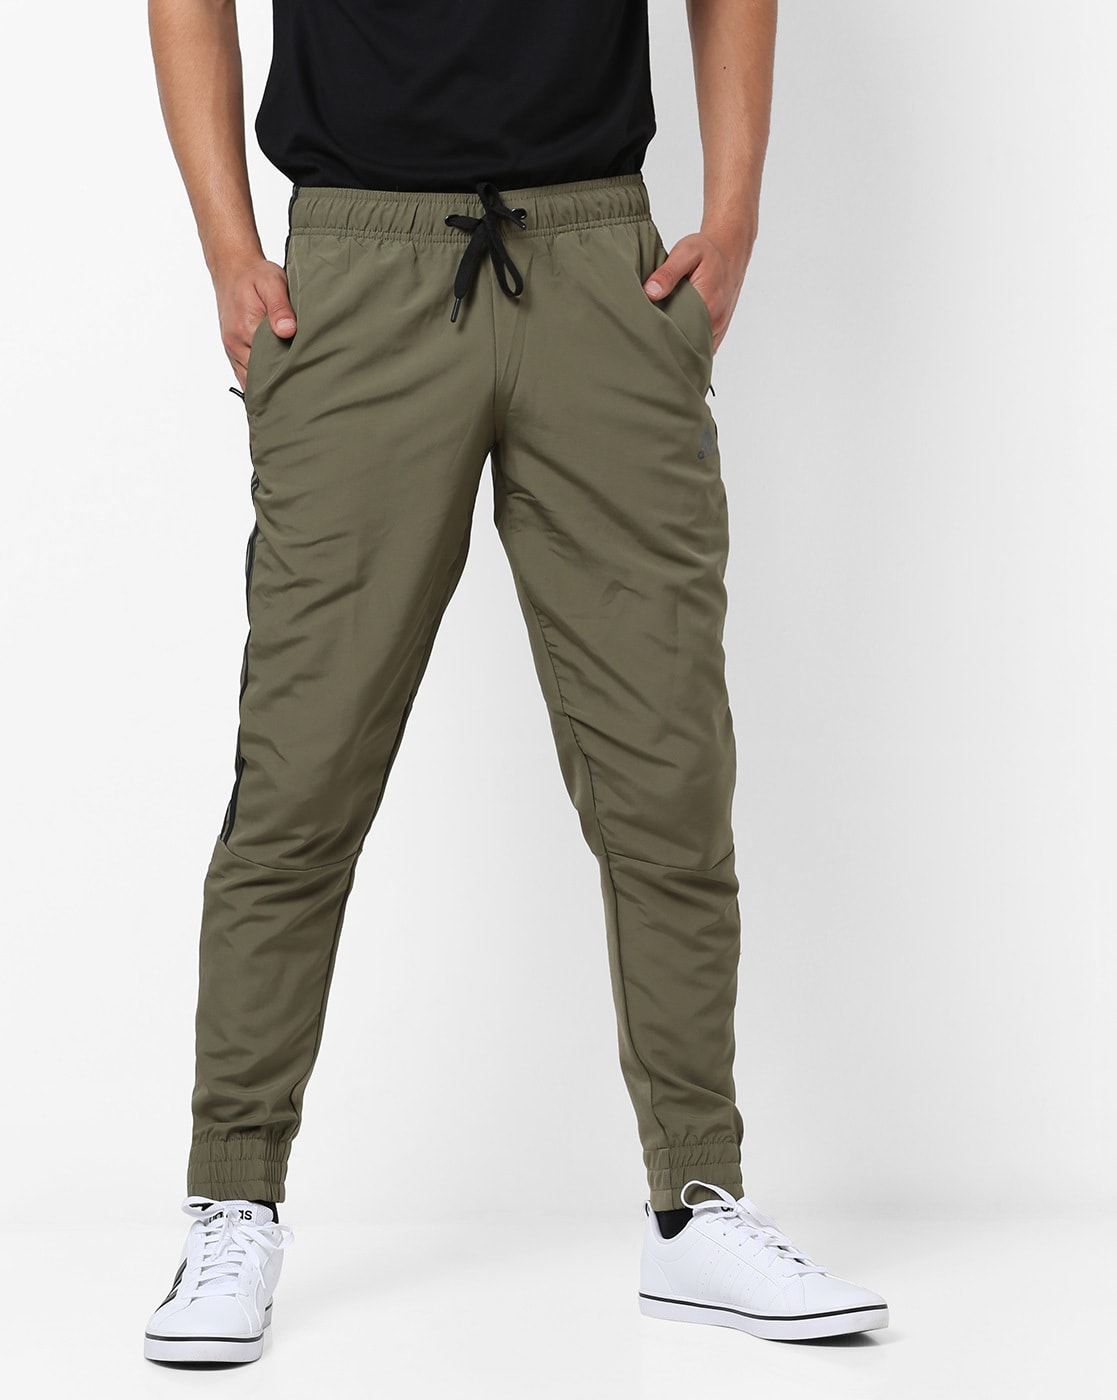 Buy Olive Green Track Pants for Men by 